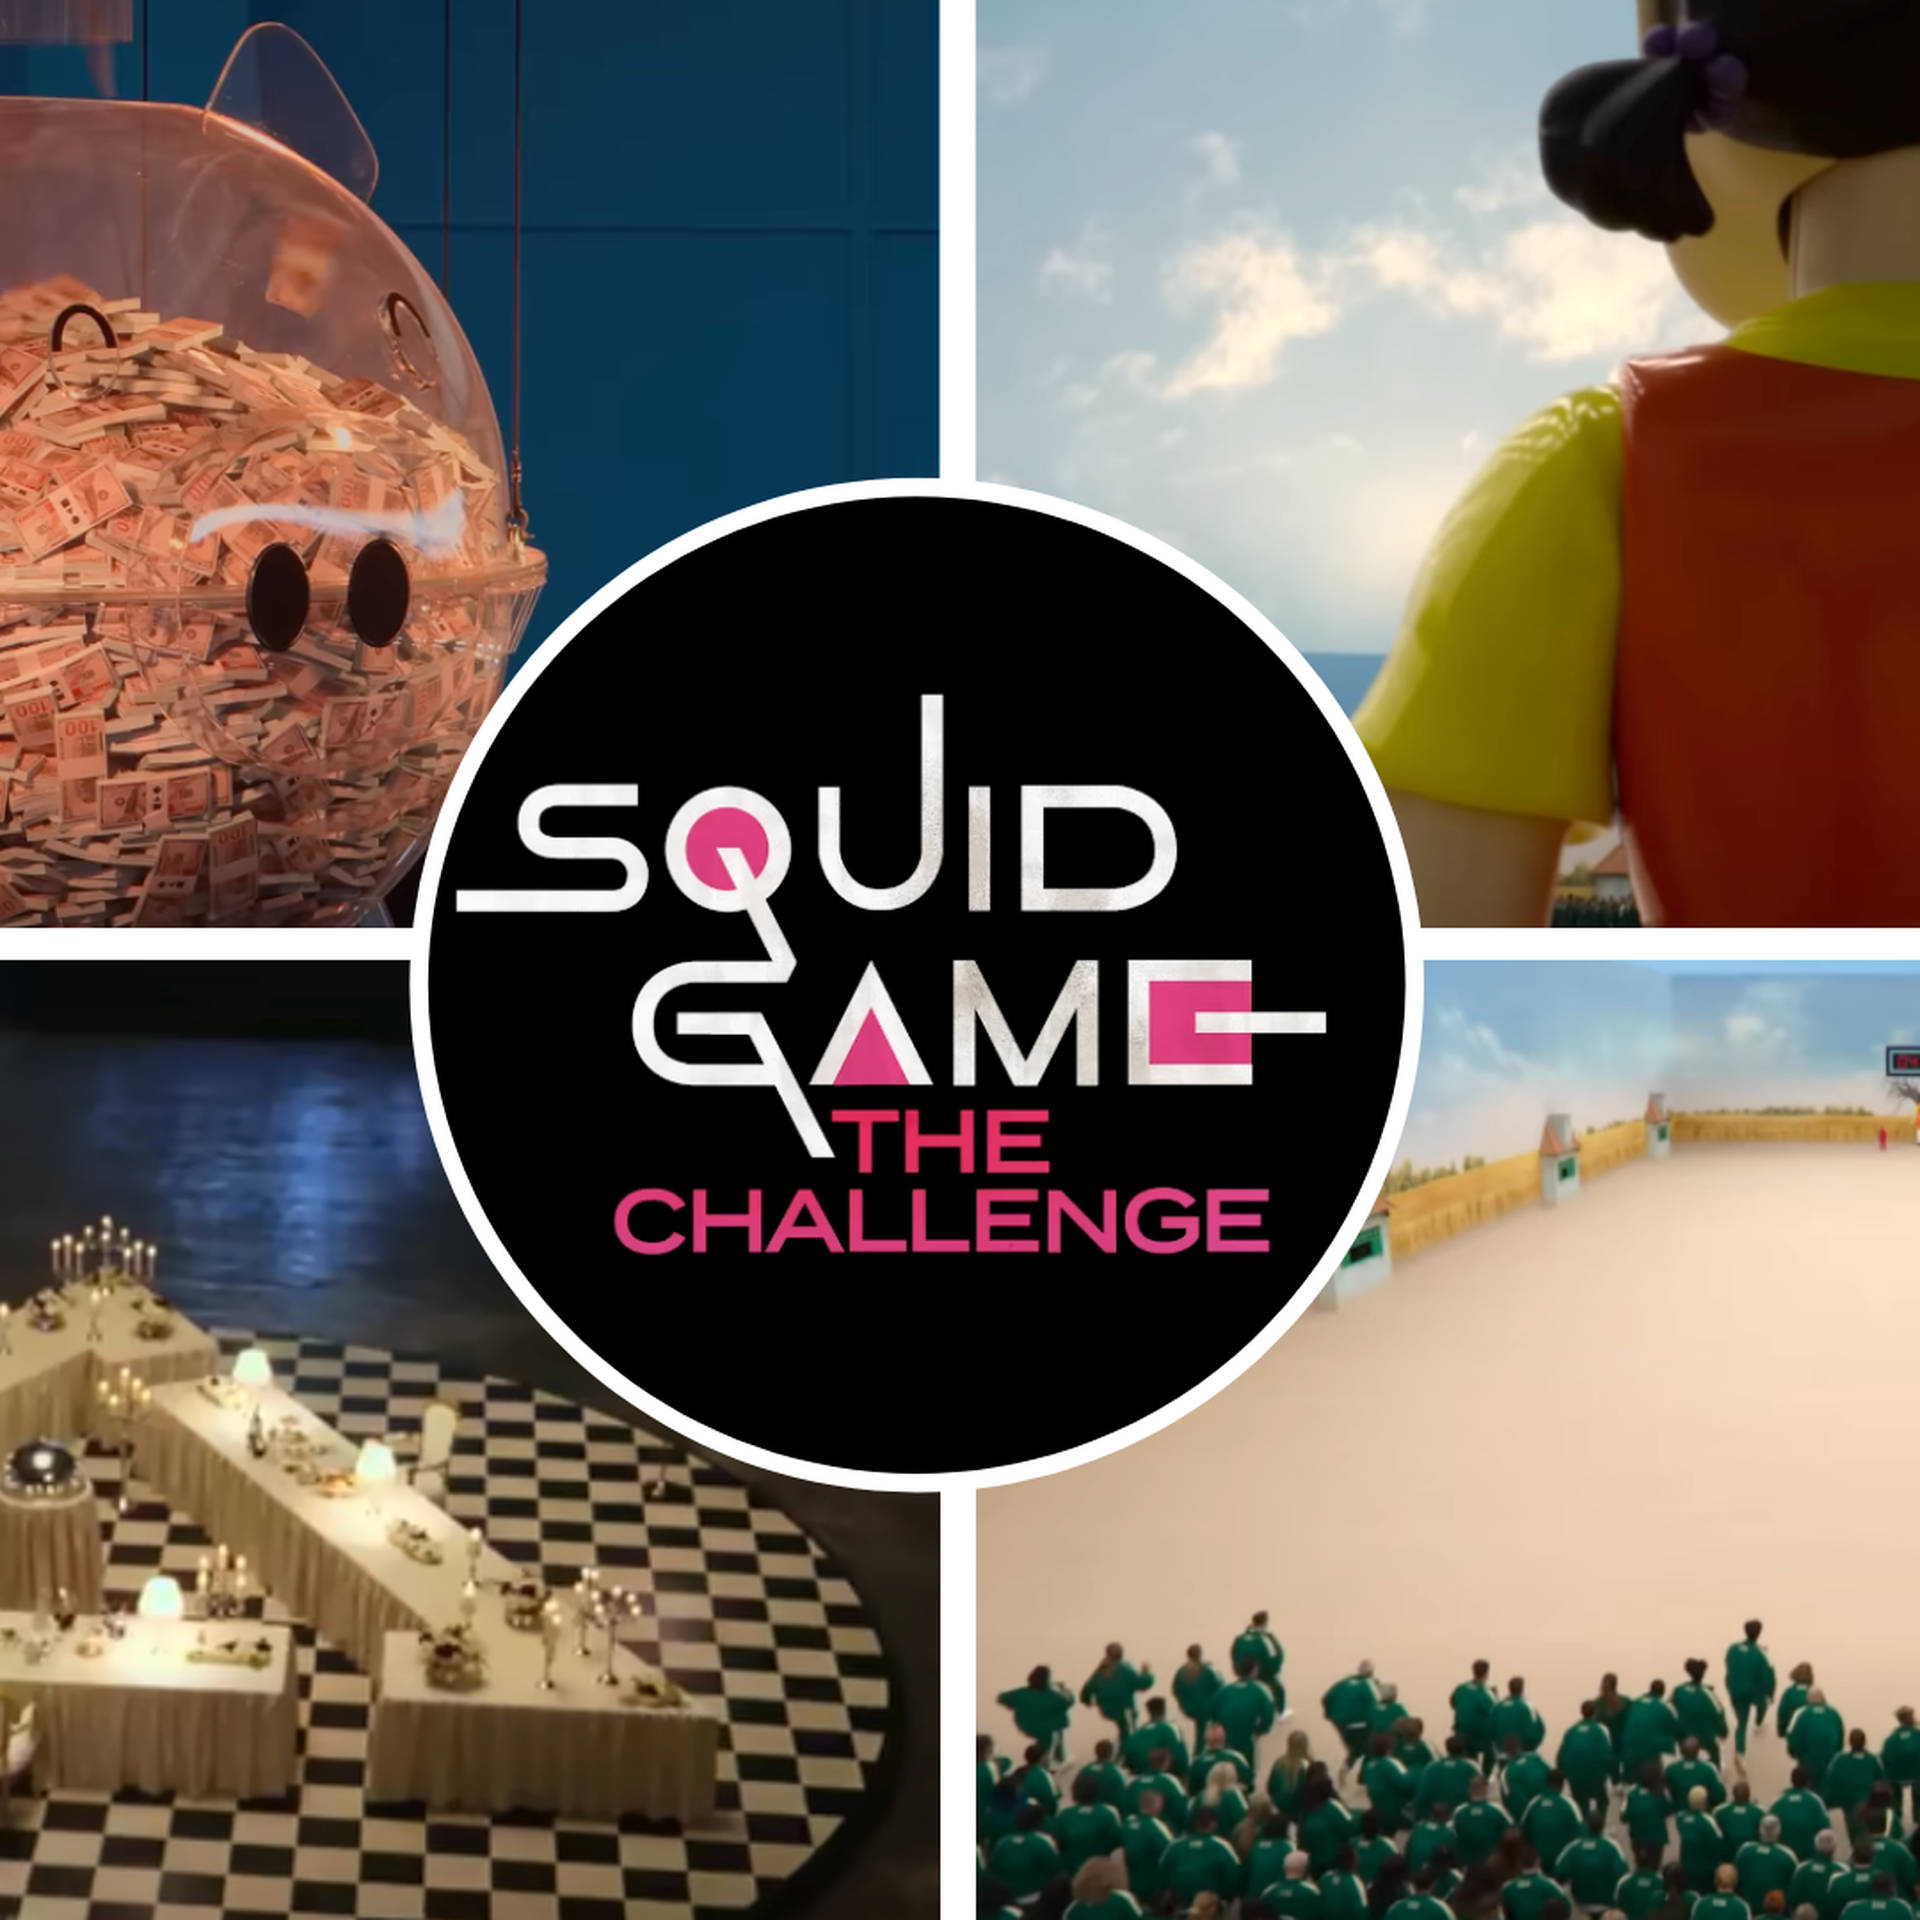 Squid Game: The Challenge Netflix release date, trailer & what to